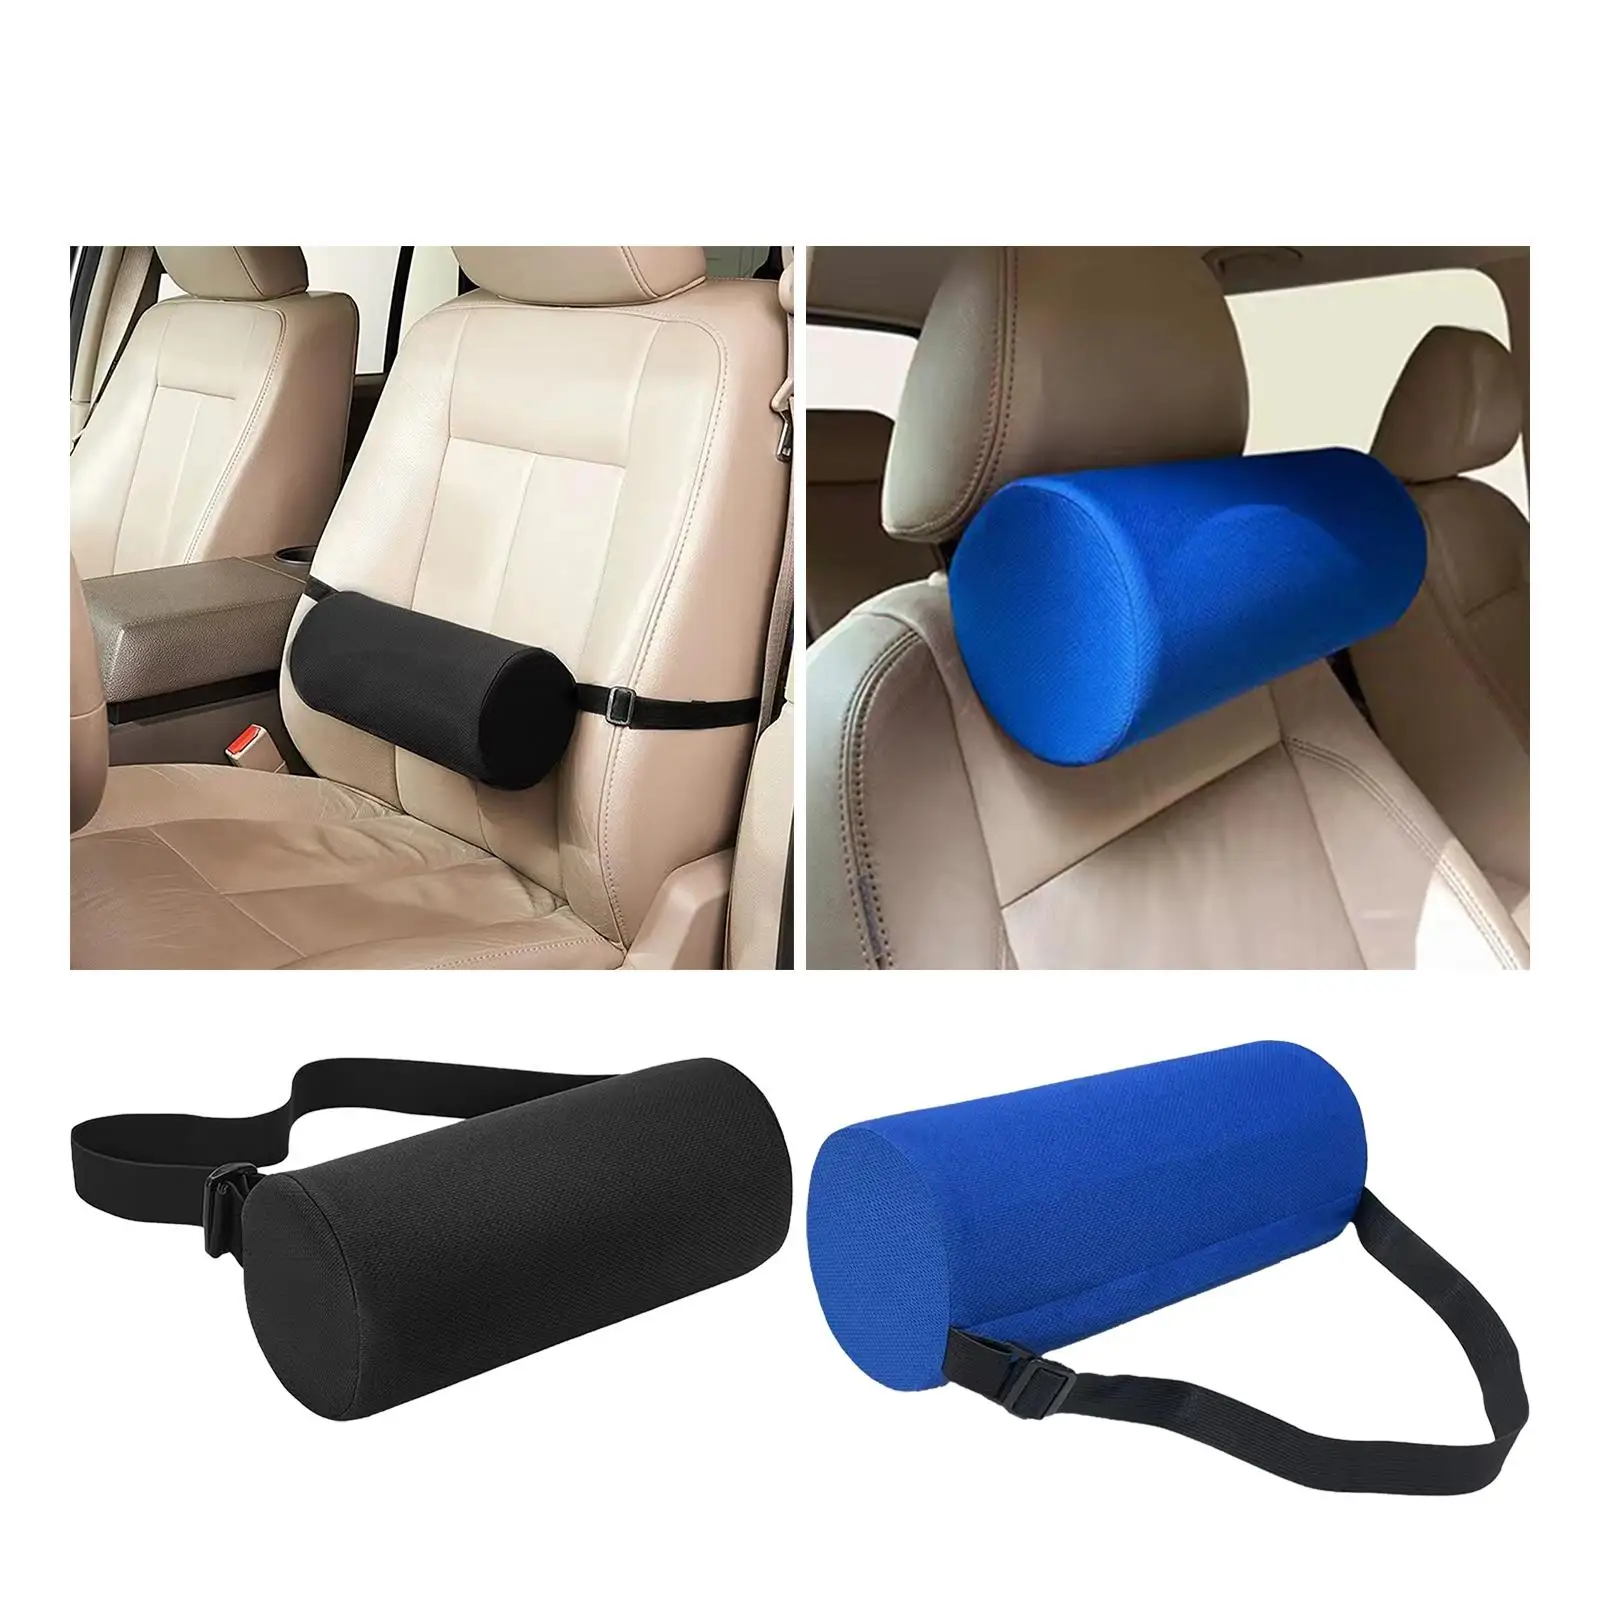 Cylindrical Waist Pillow Waist Support Pillow for Home Vehicle Reading